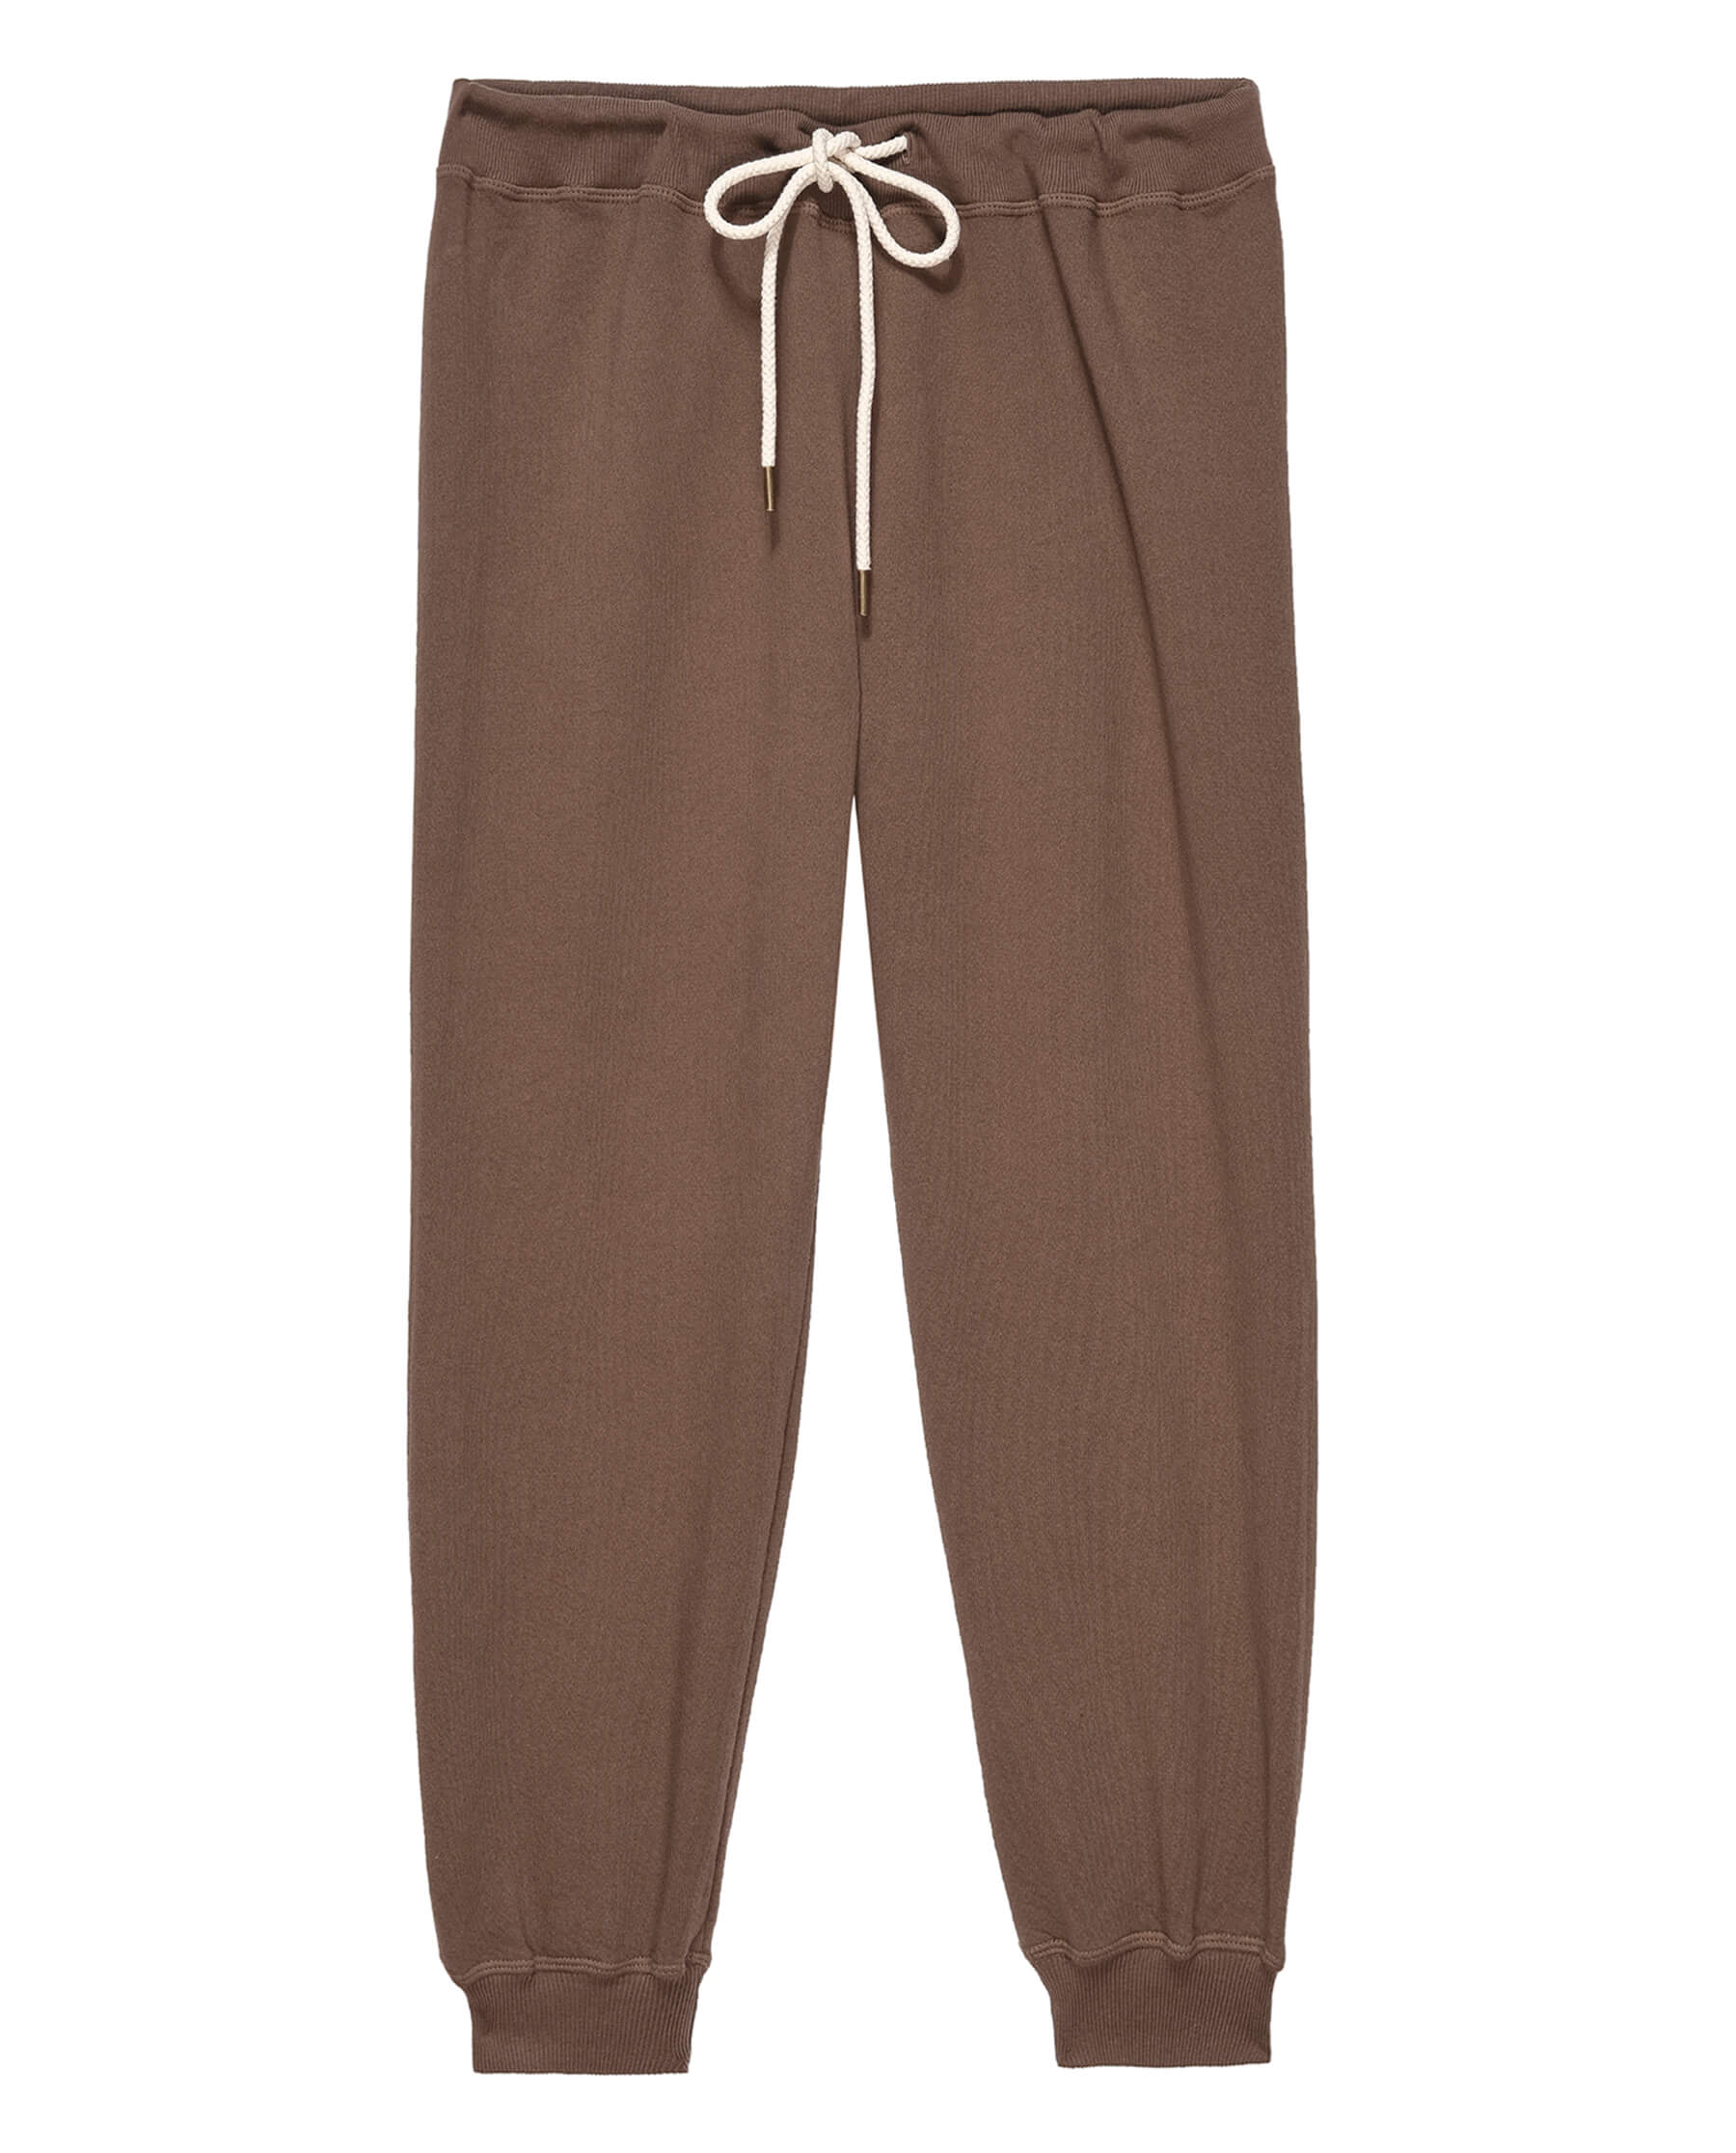 The Cropped Sweatpant. Solid -- Hickory